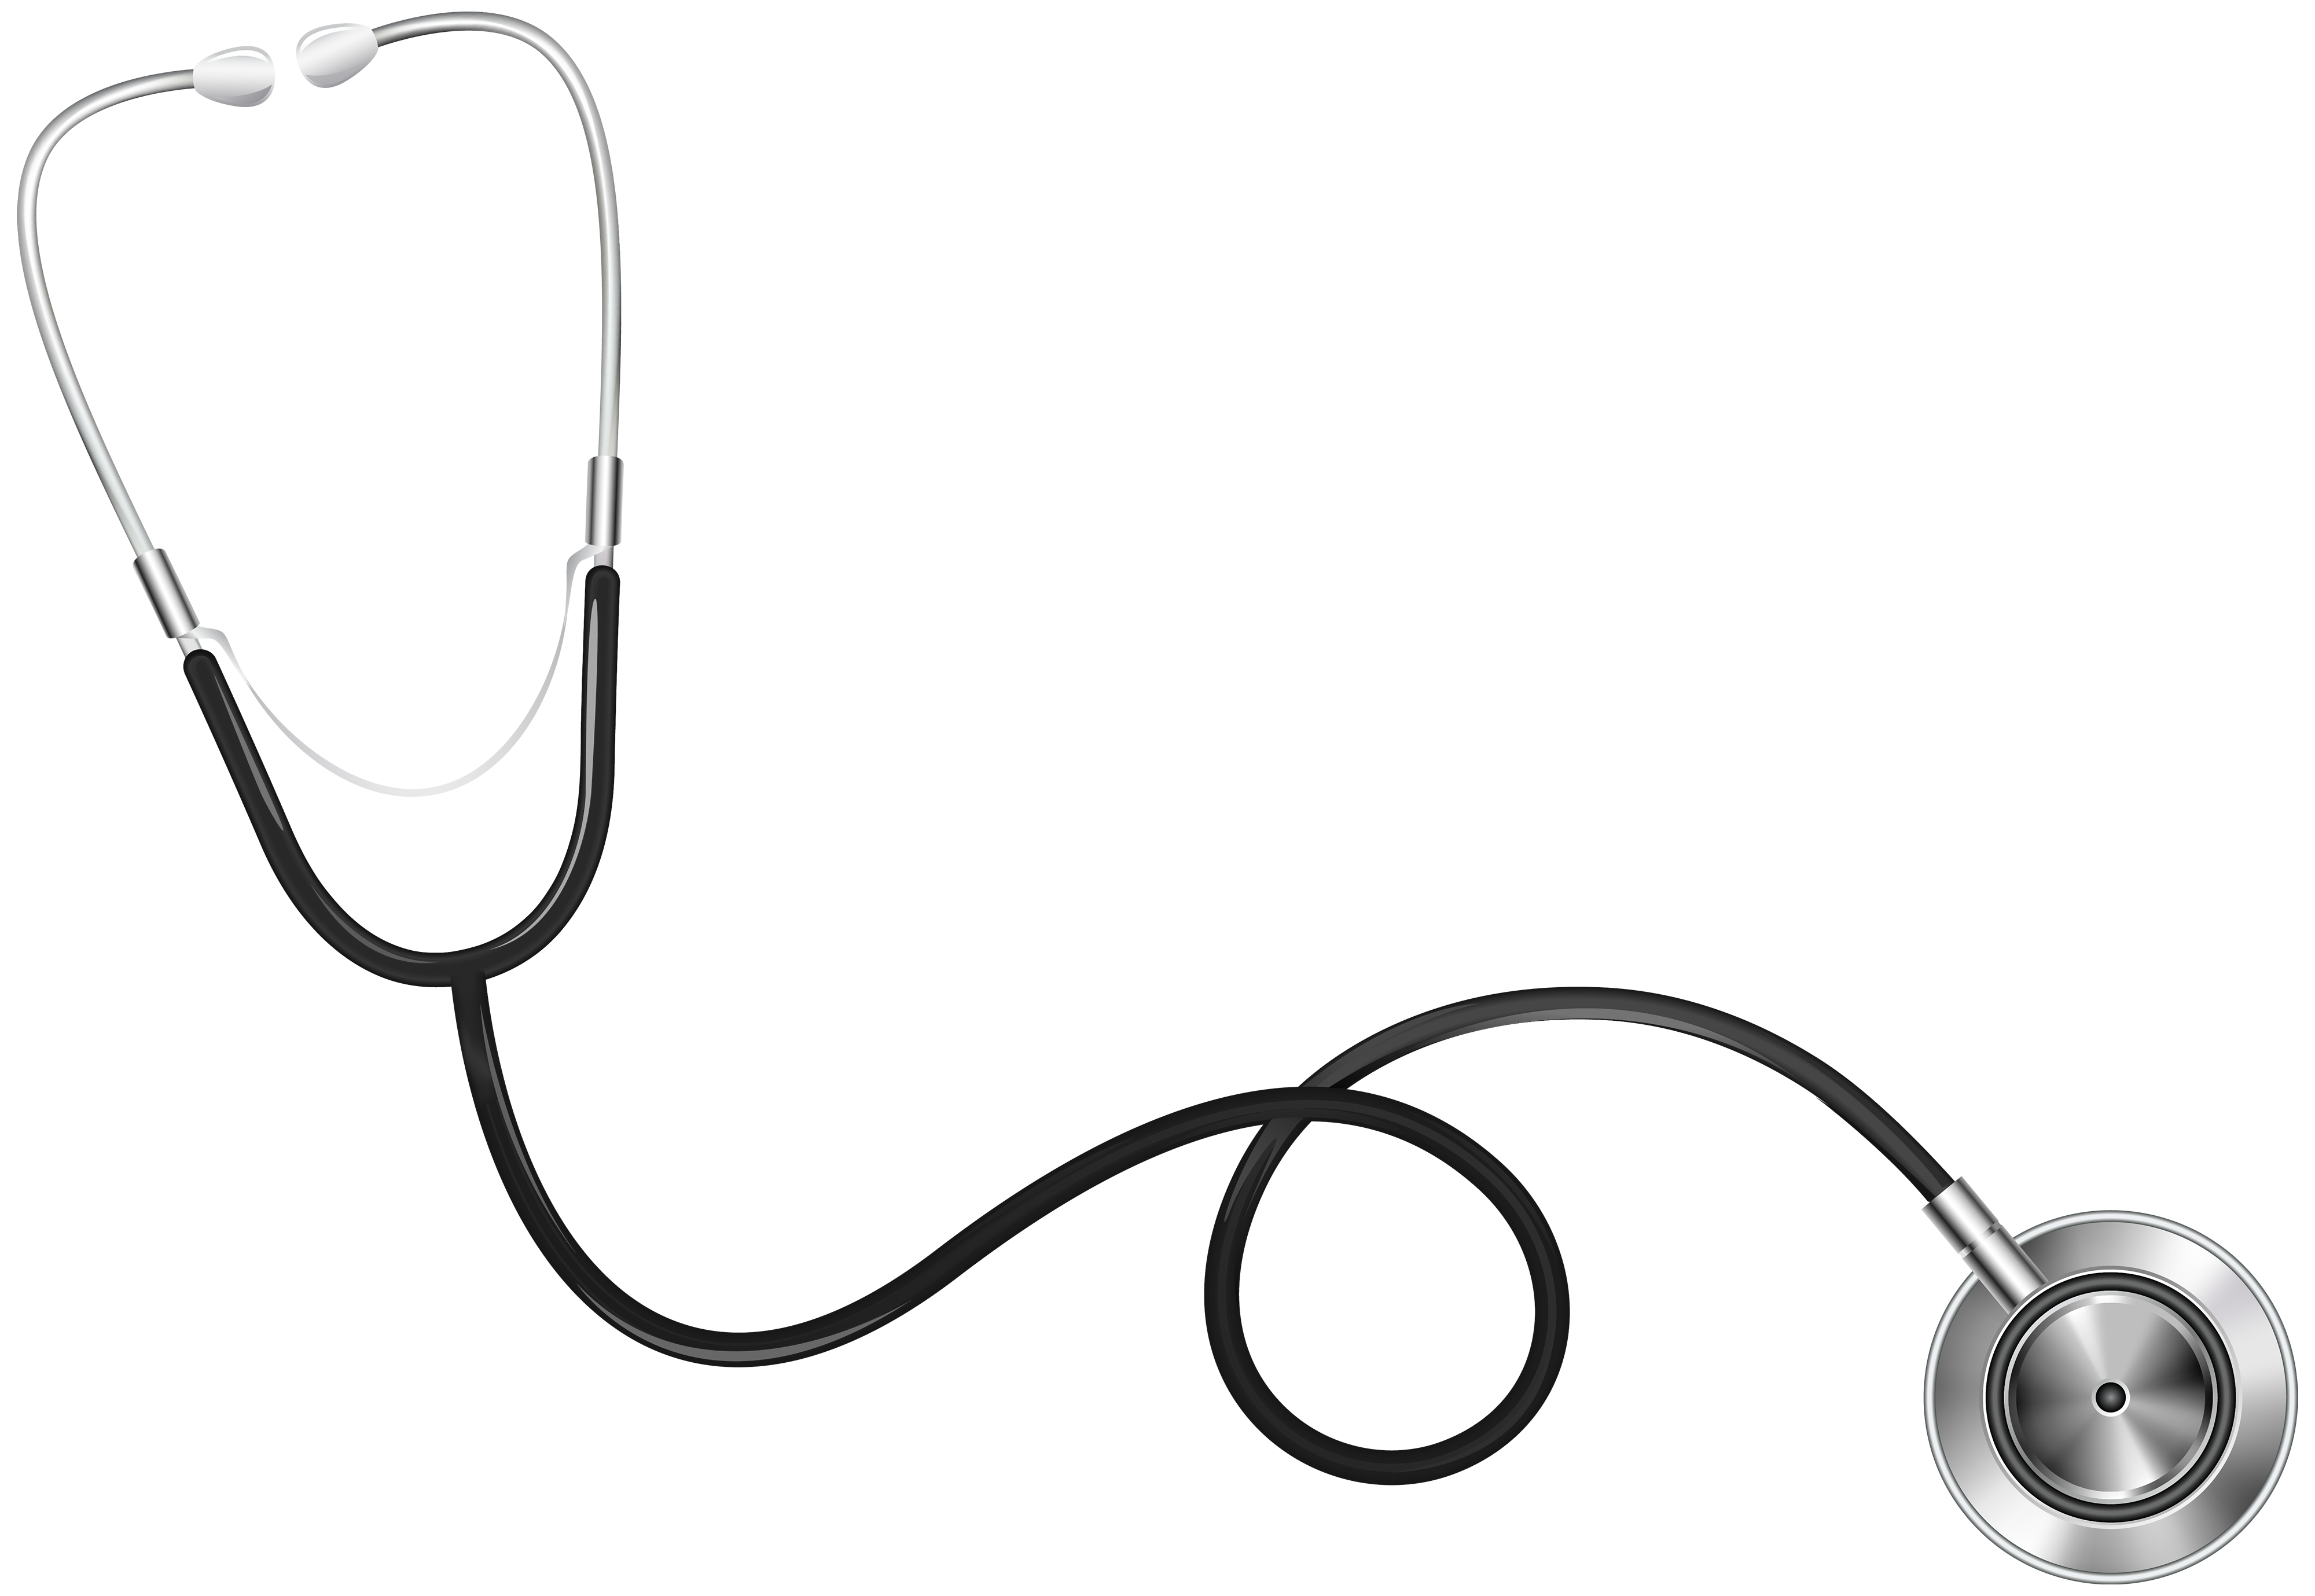 Stethoscope Medicine Physician Clip Art Stethoscope Png Download